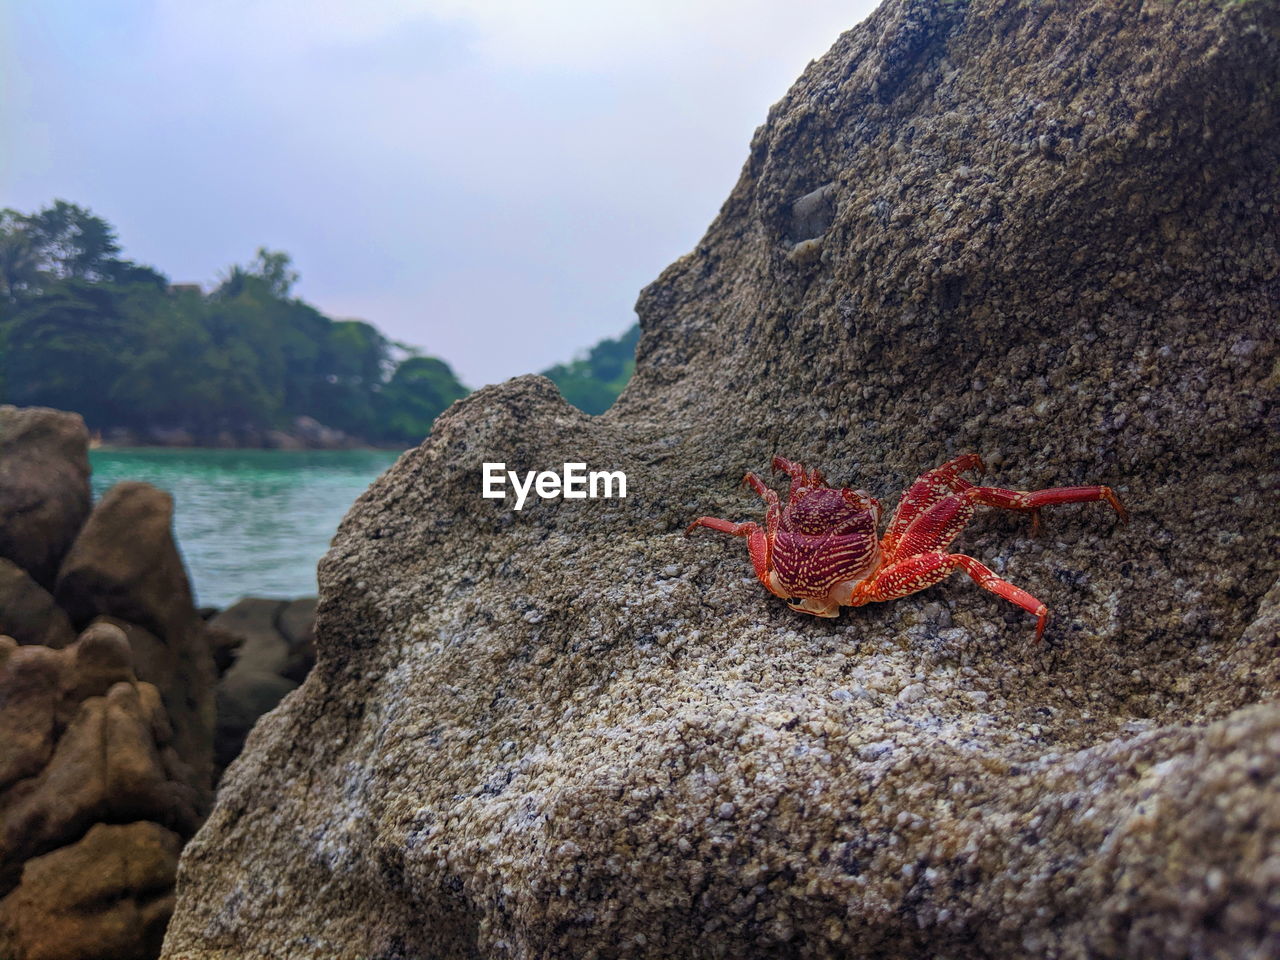 CLOSE-UP OF CRAB ON ROCK BY SEA